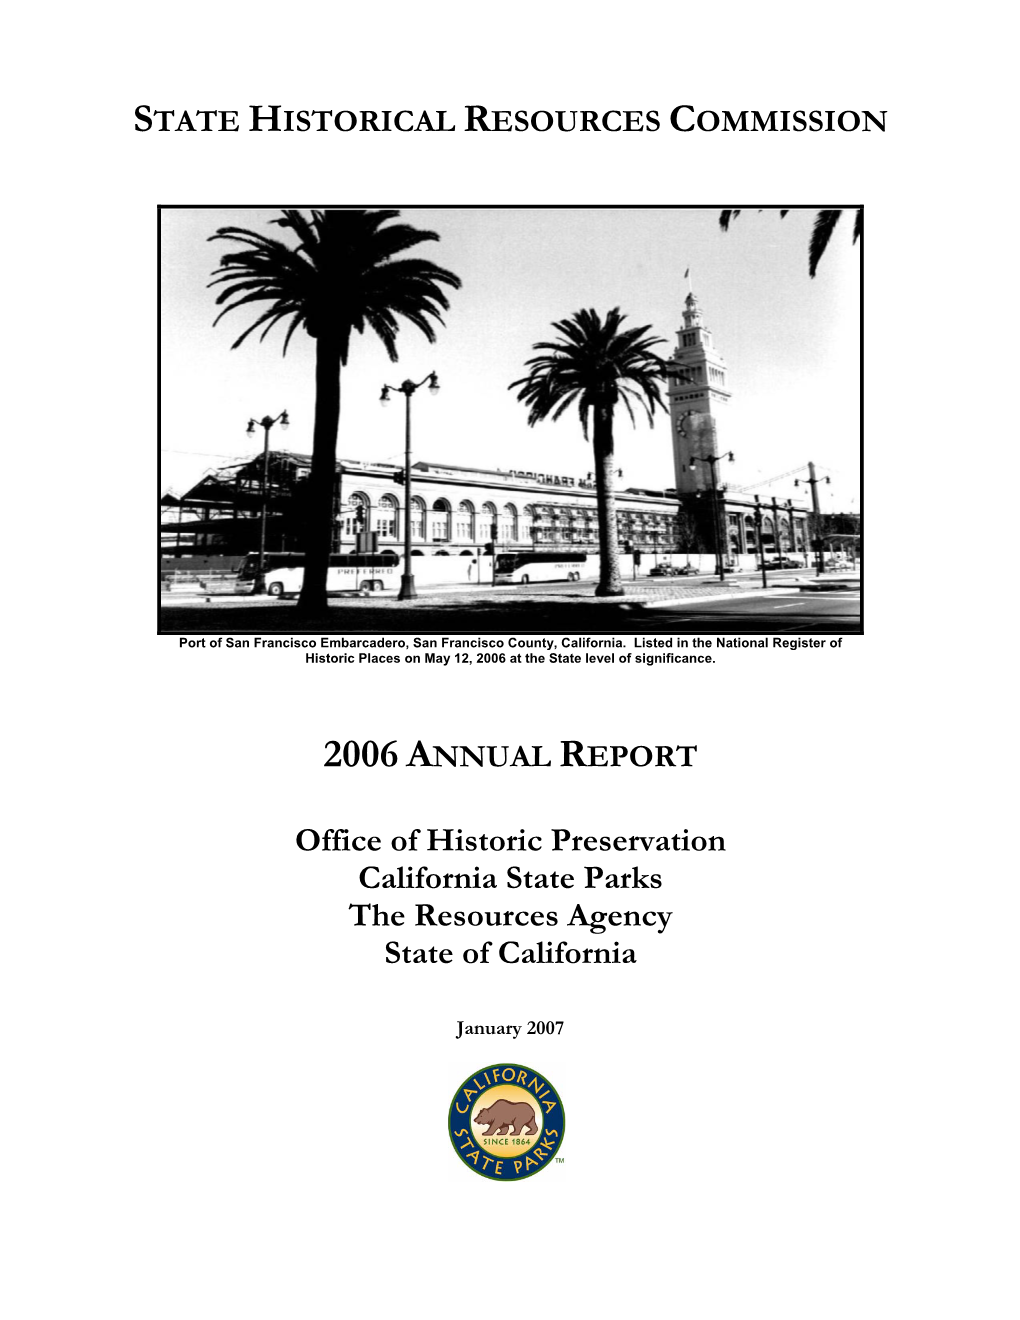 State Historical Resources Commission 2006 Annual Report